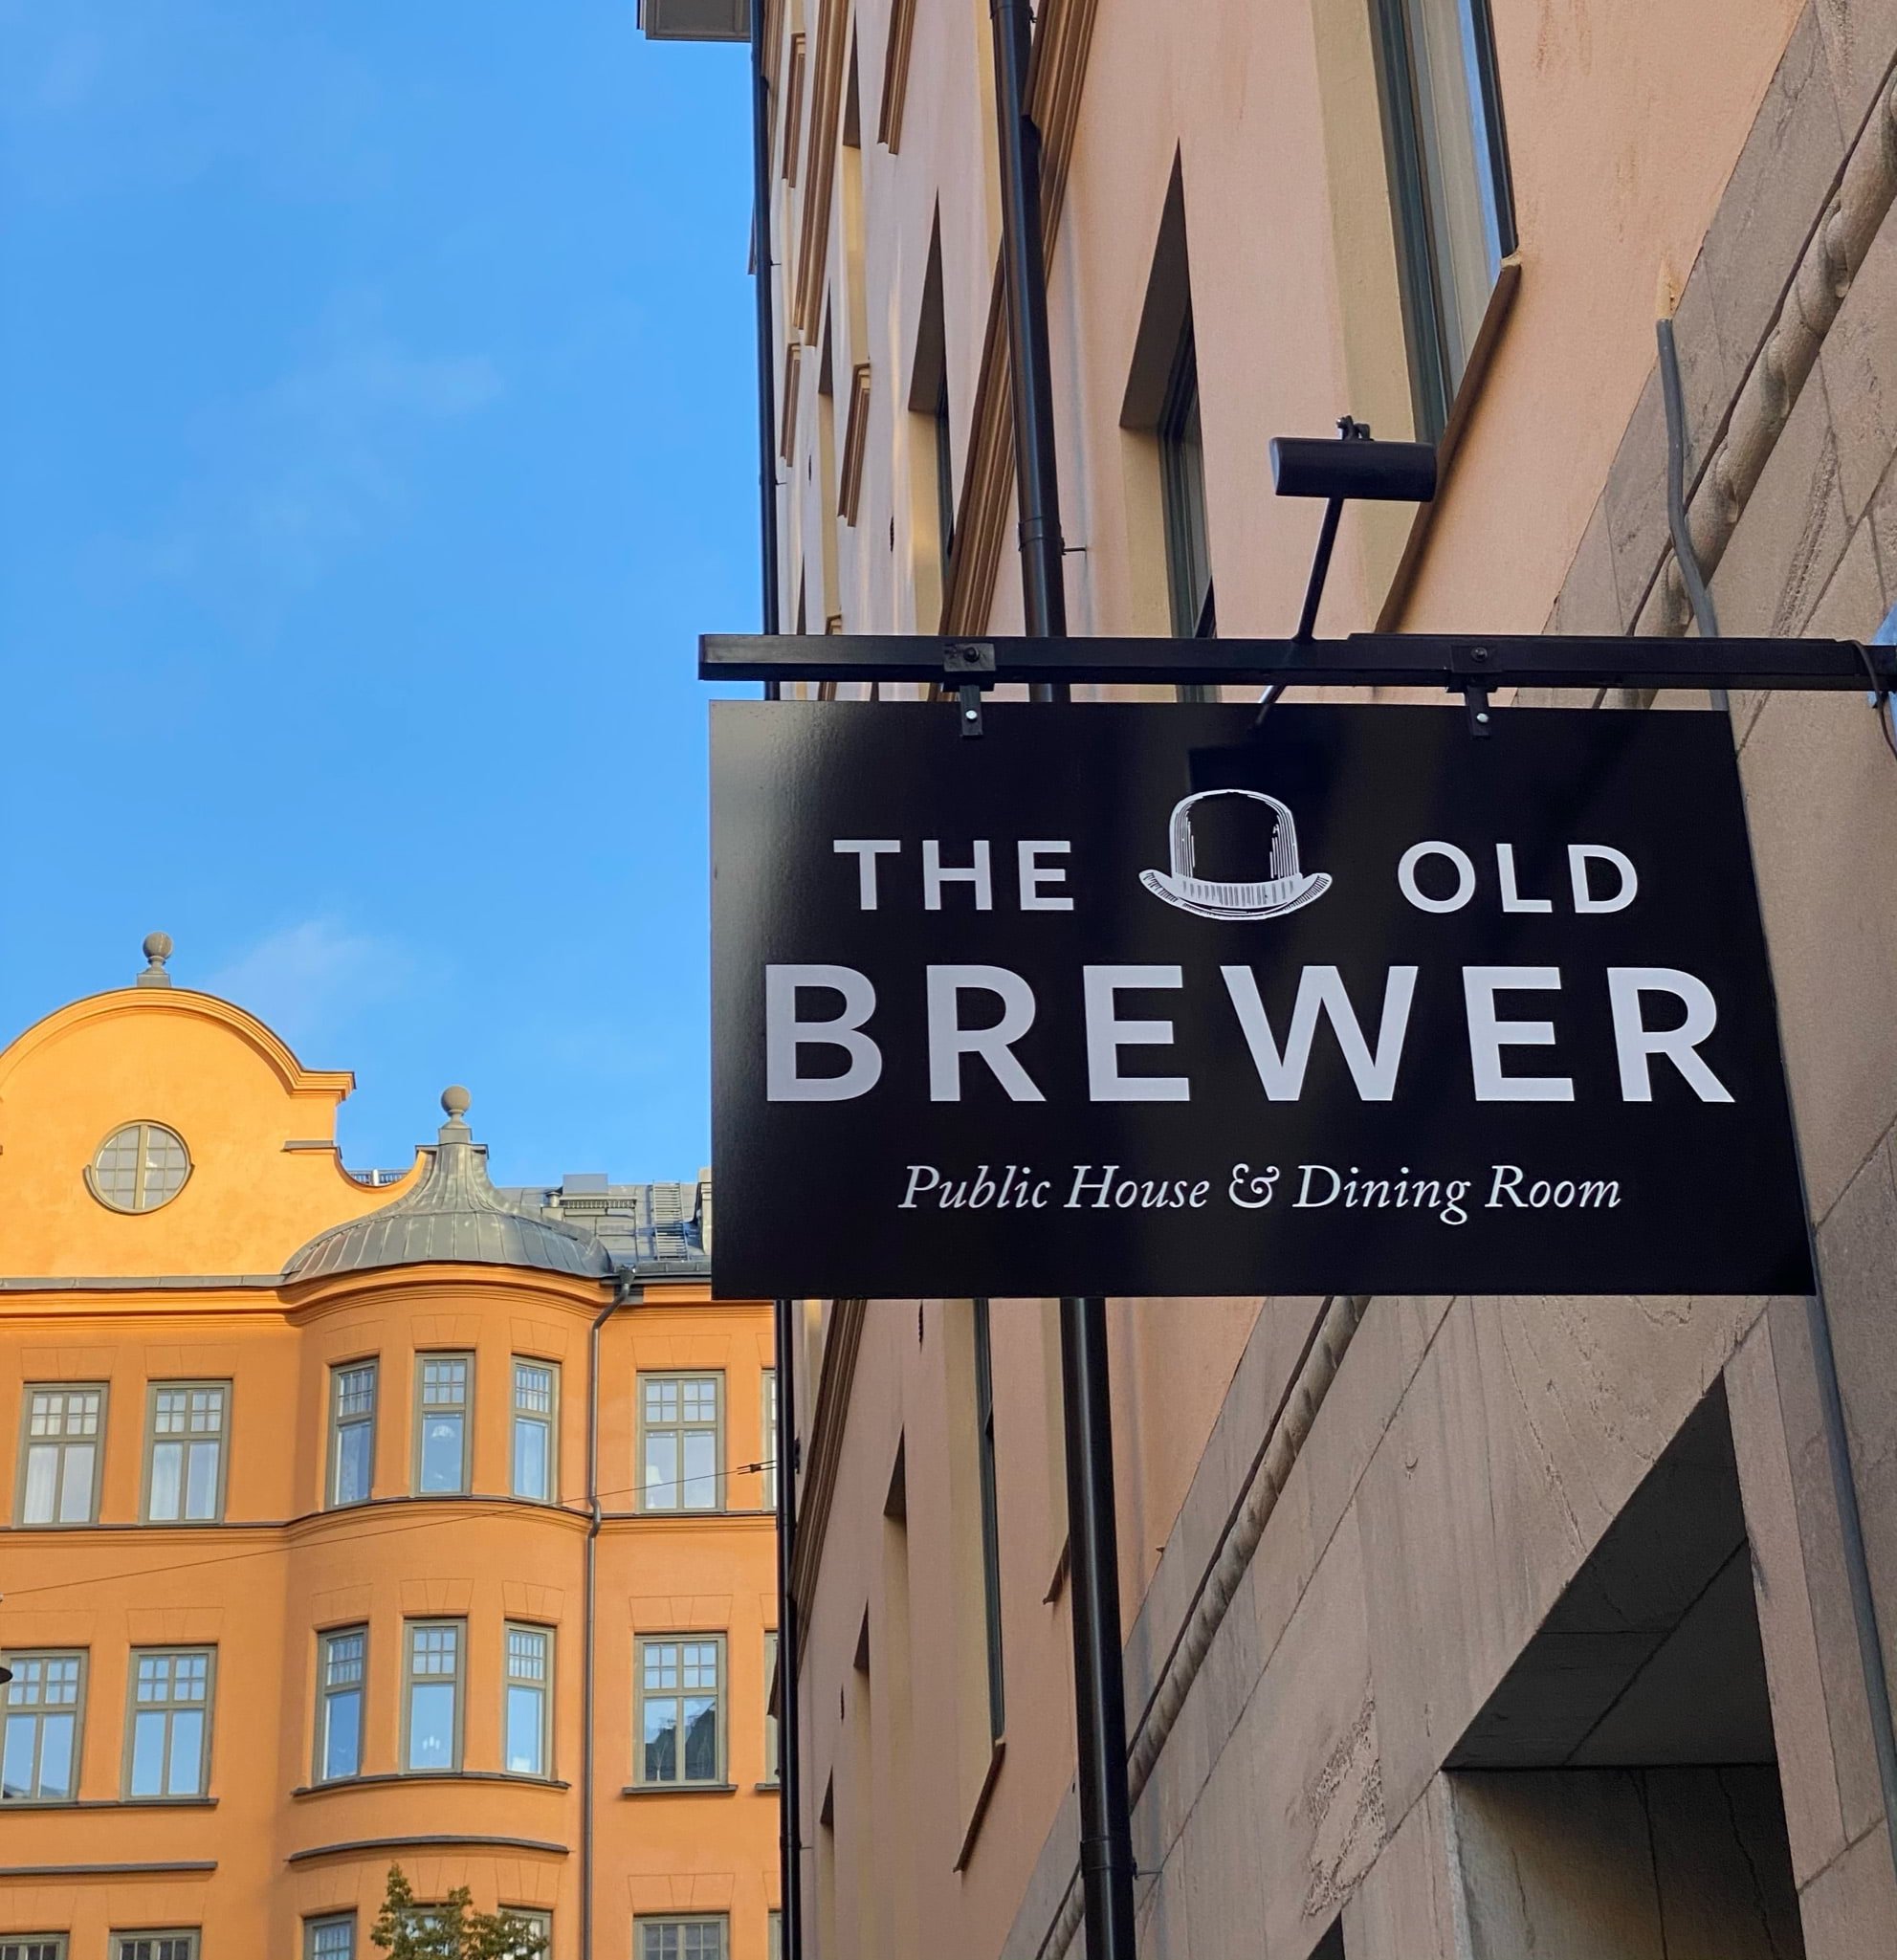 Photo from The Old Brewer by Martin D.